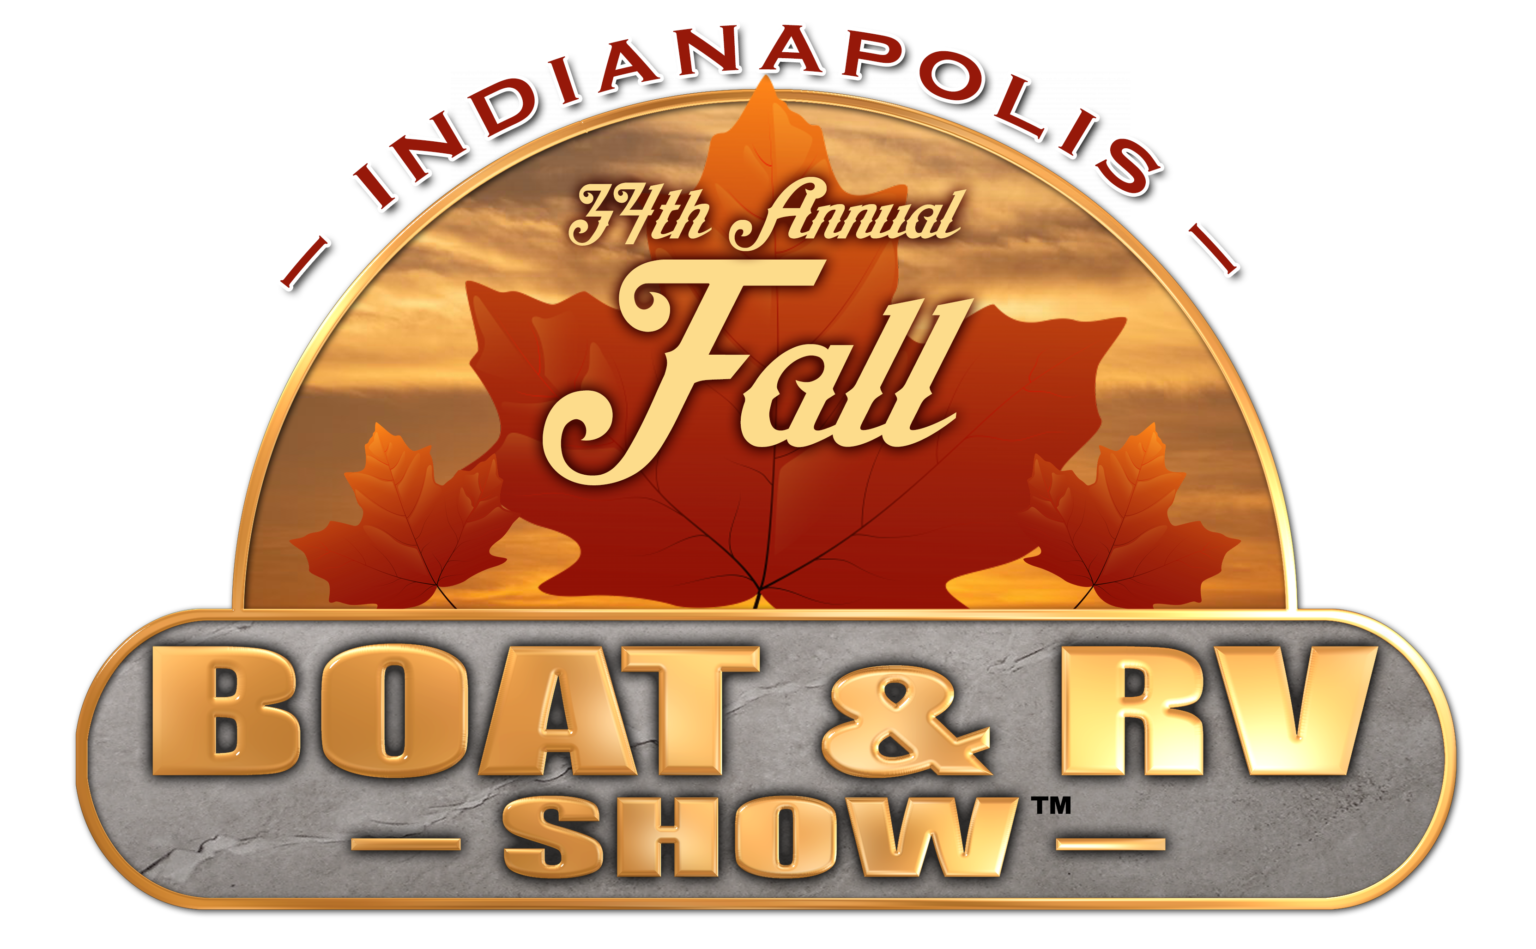 The Indianapolis Fall Boat & RV Show